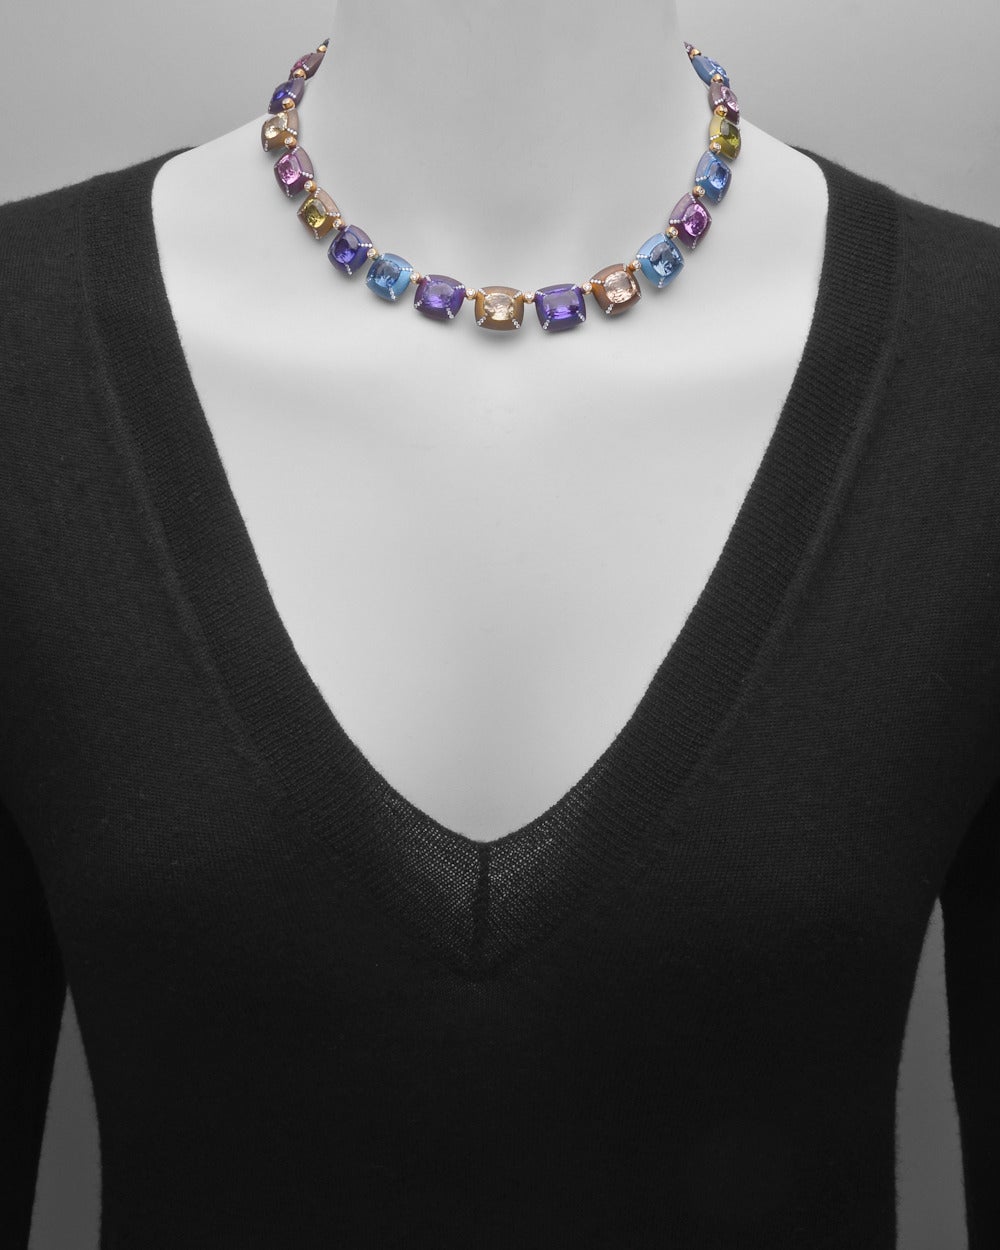 Multicolored sapphire necklace in titanium and 18k gold with diamond accents. 21 cushion-cut natural sapphires, ranging in color from royal blue to brilliant pink, weighing 49.70 total carats with 390 round diamonds weighing 3.17 total carats.